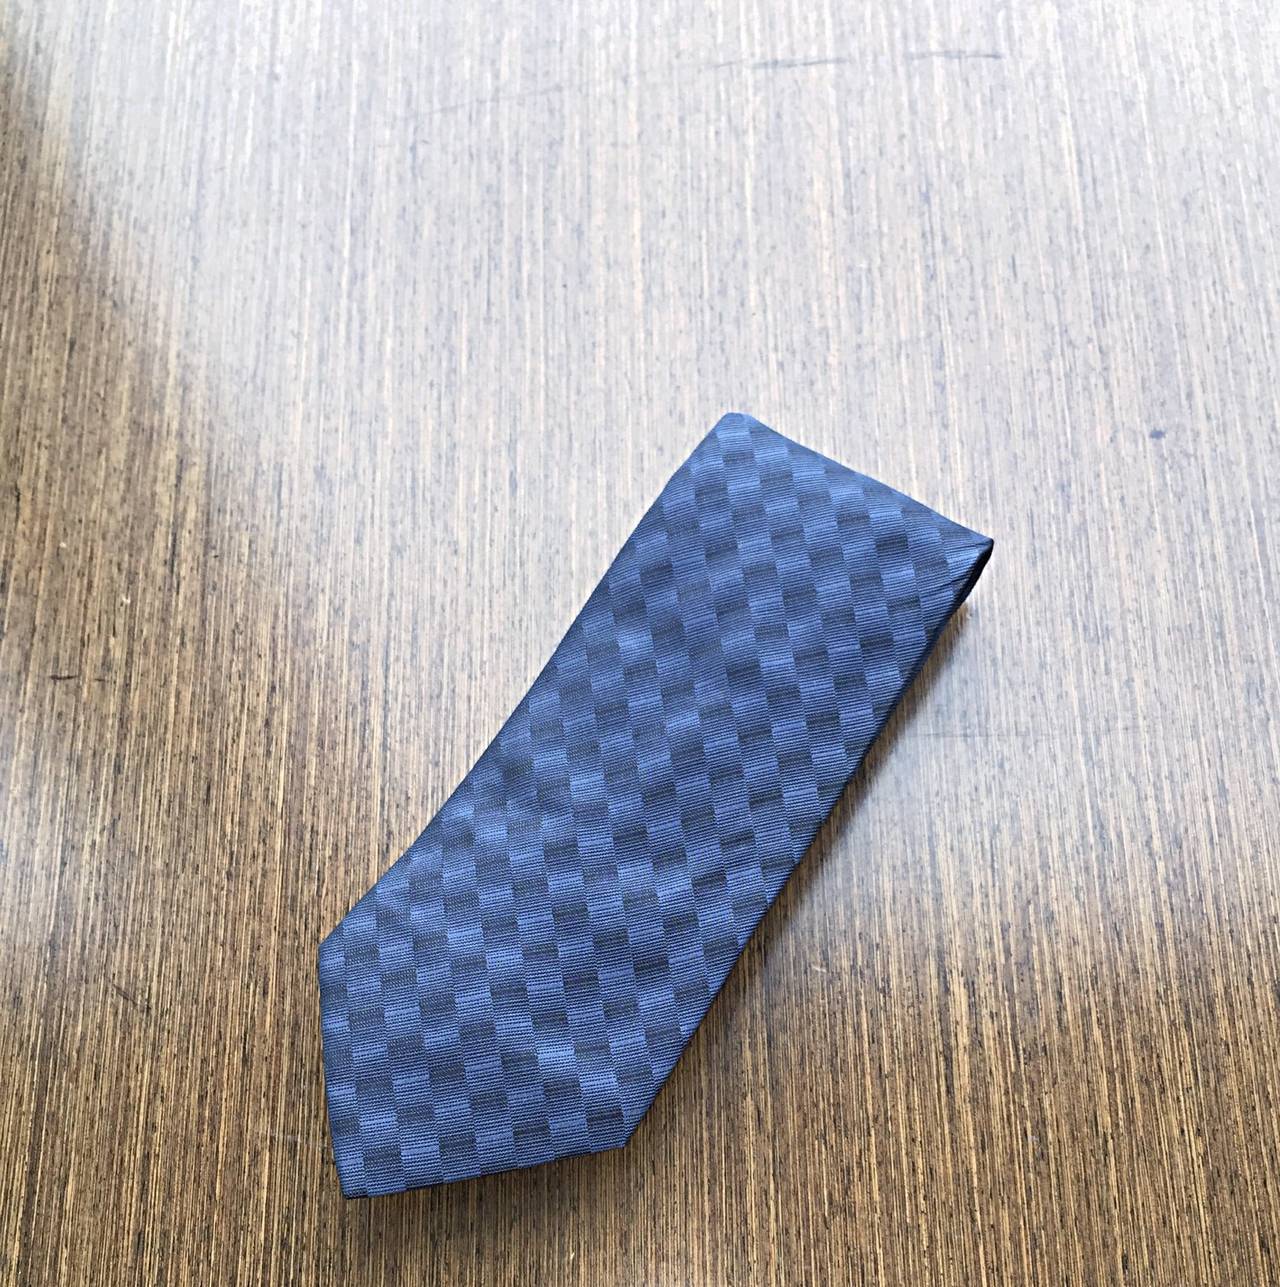 Black Brand New Givenchy by Ricardo Tisci Navy Blue Tie for Father's Day